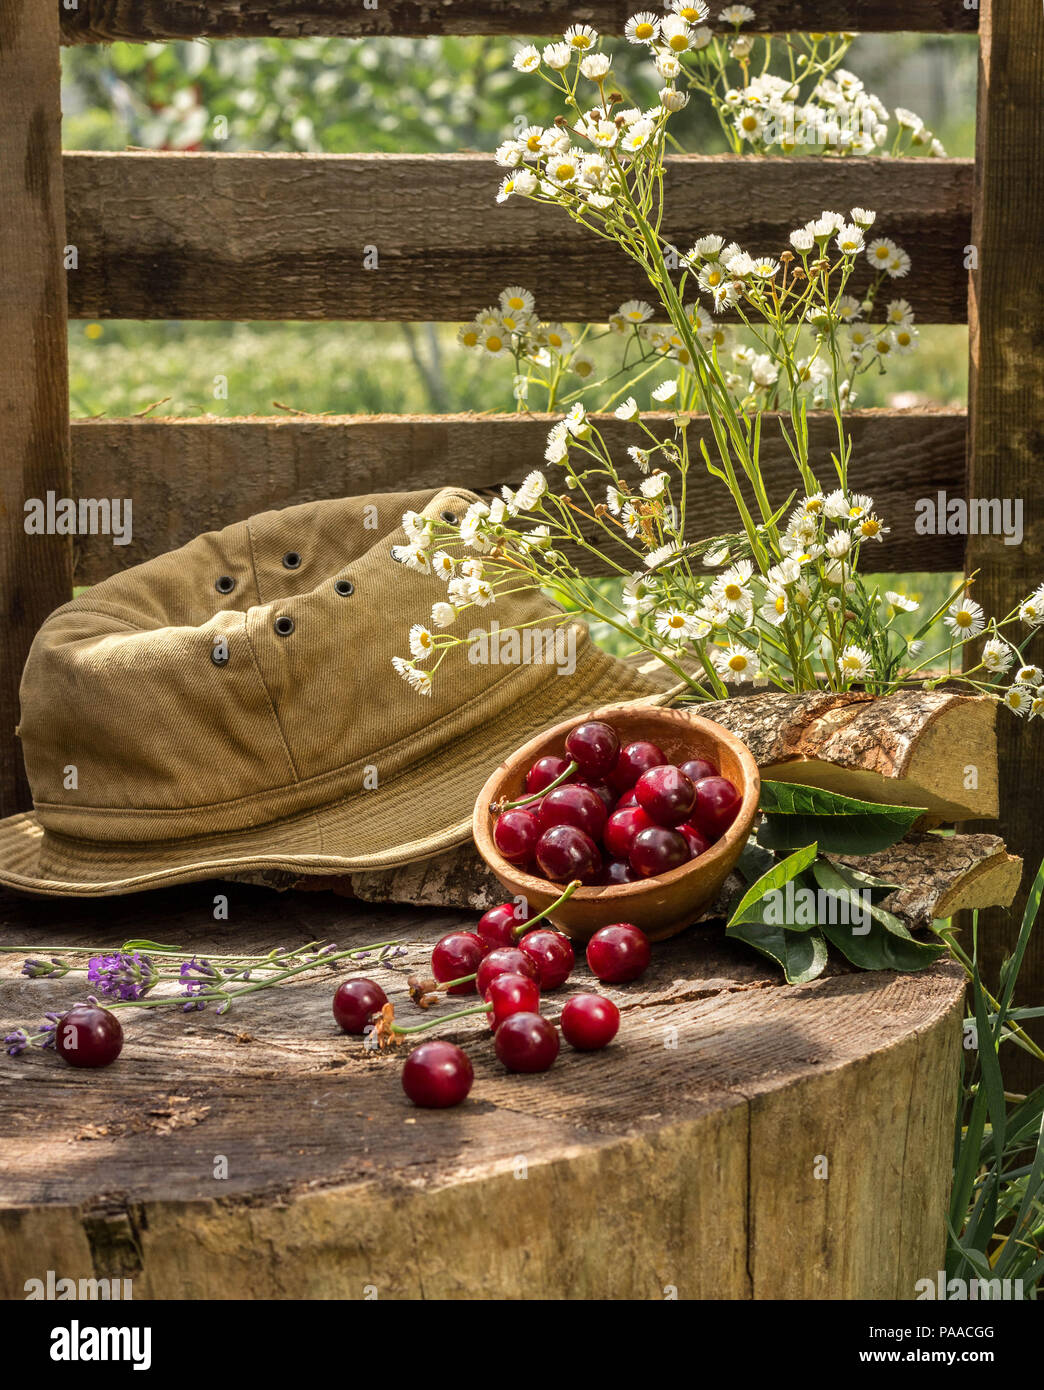 Cherries in a bowl lie on a stump next to a hat and flowers. Slow life. Stock Photo